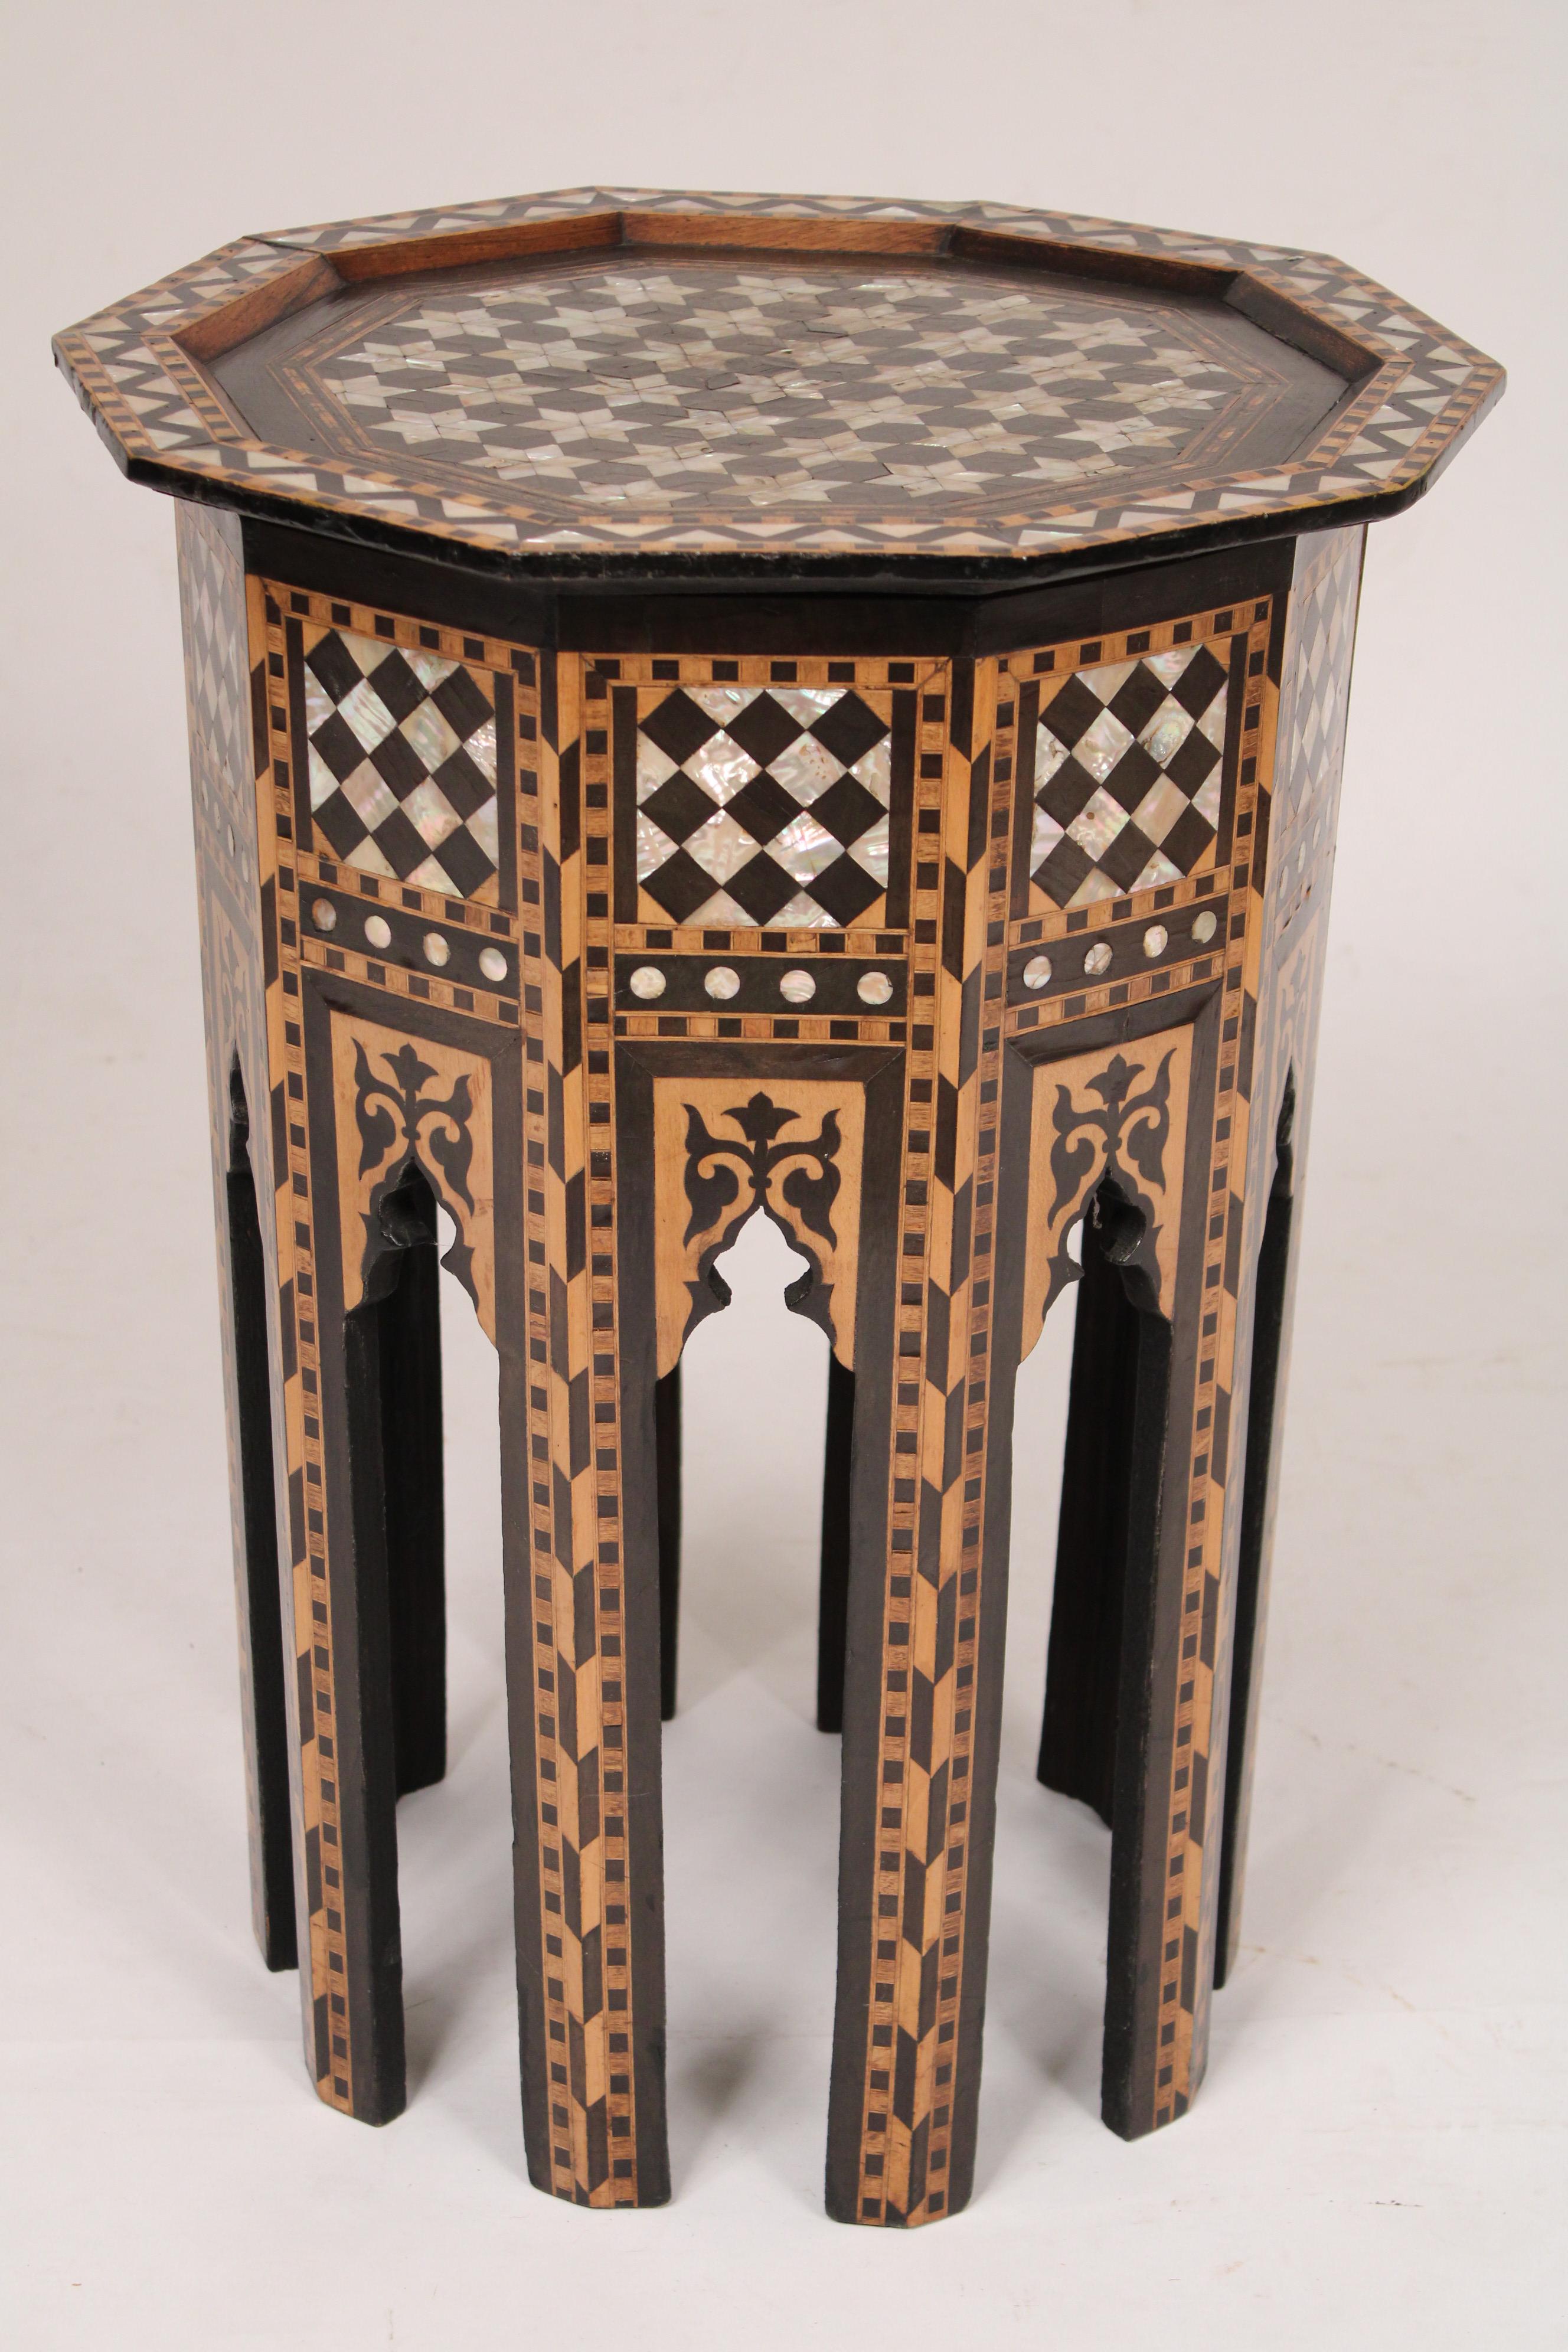 Levantine mother of pearl inlaid decagon shaped occasional table, circa 1980. A tremendous amount of time and craftsmanship went into making this table. With exquisite mother of pearl and wood inlays.